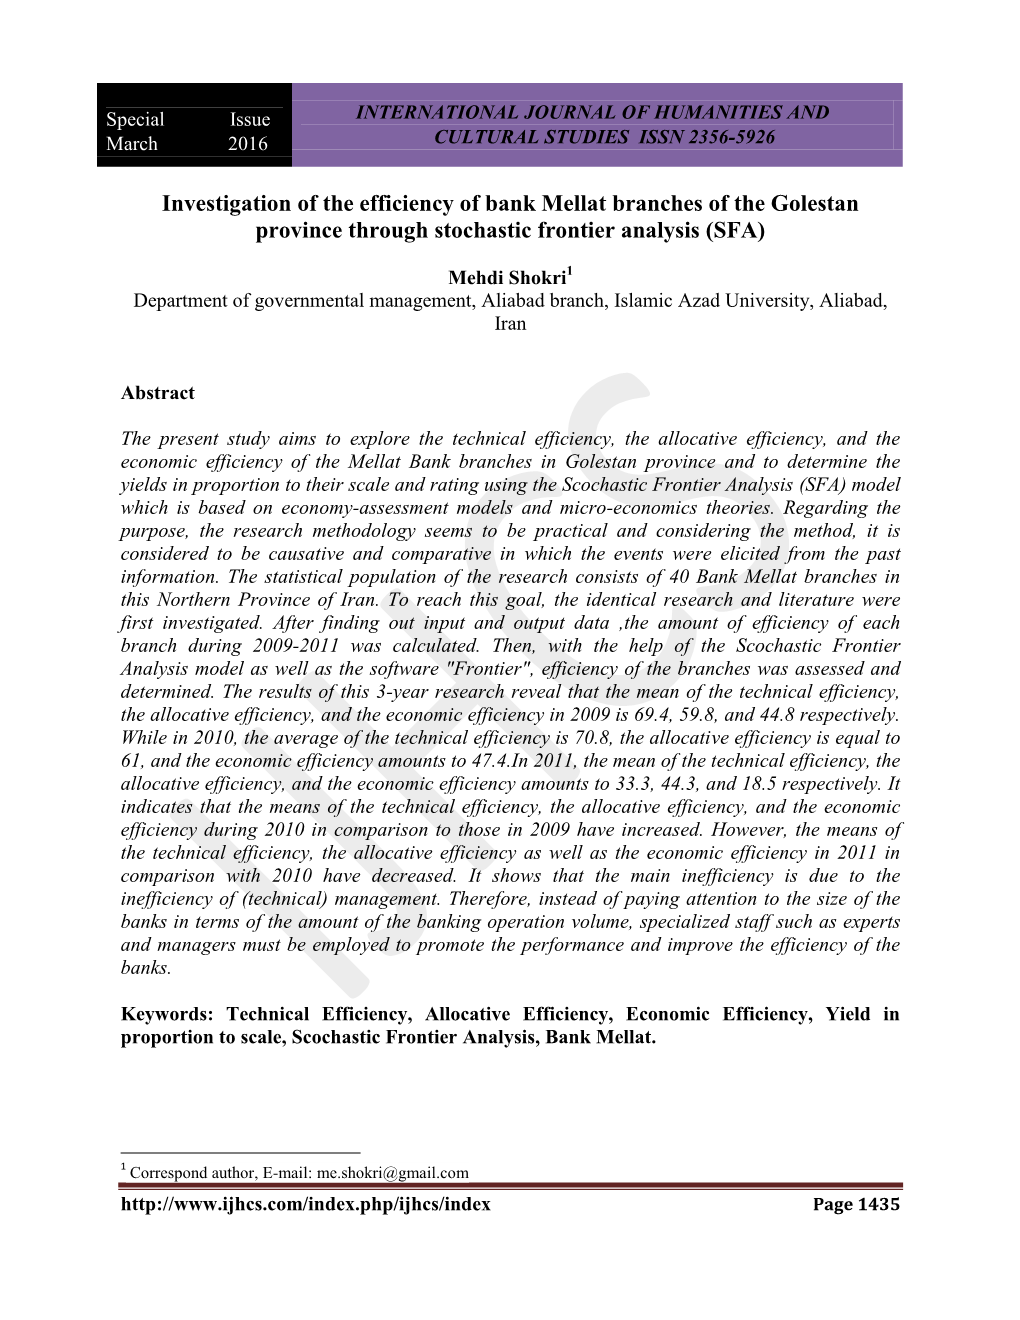 Investigation of the Efficiency of Bank Mellat Branches of the Golestan Province Through Stochastic Frontier Analysis (SFA)